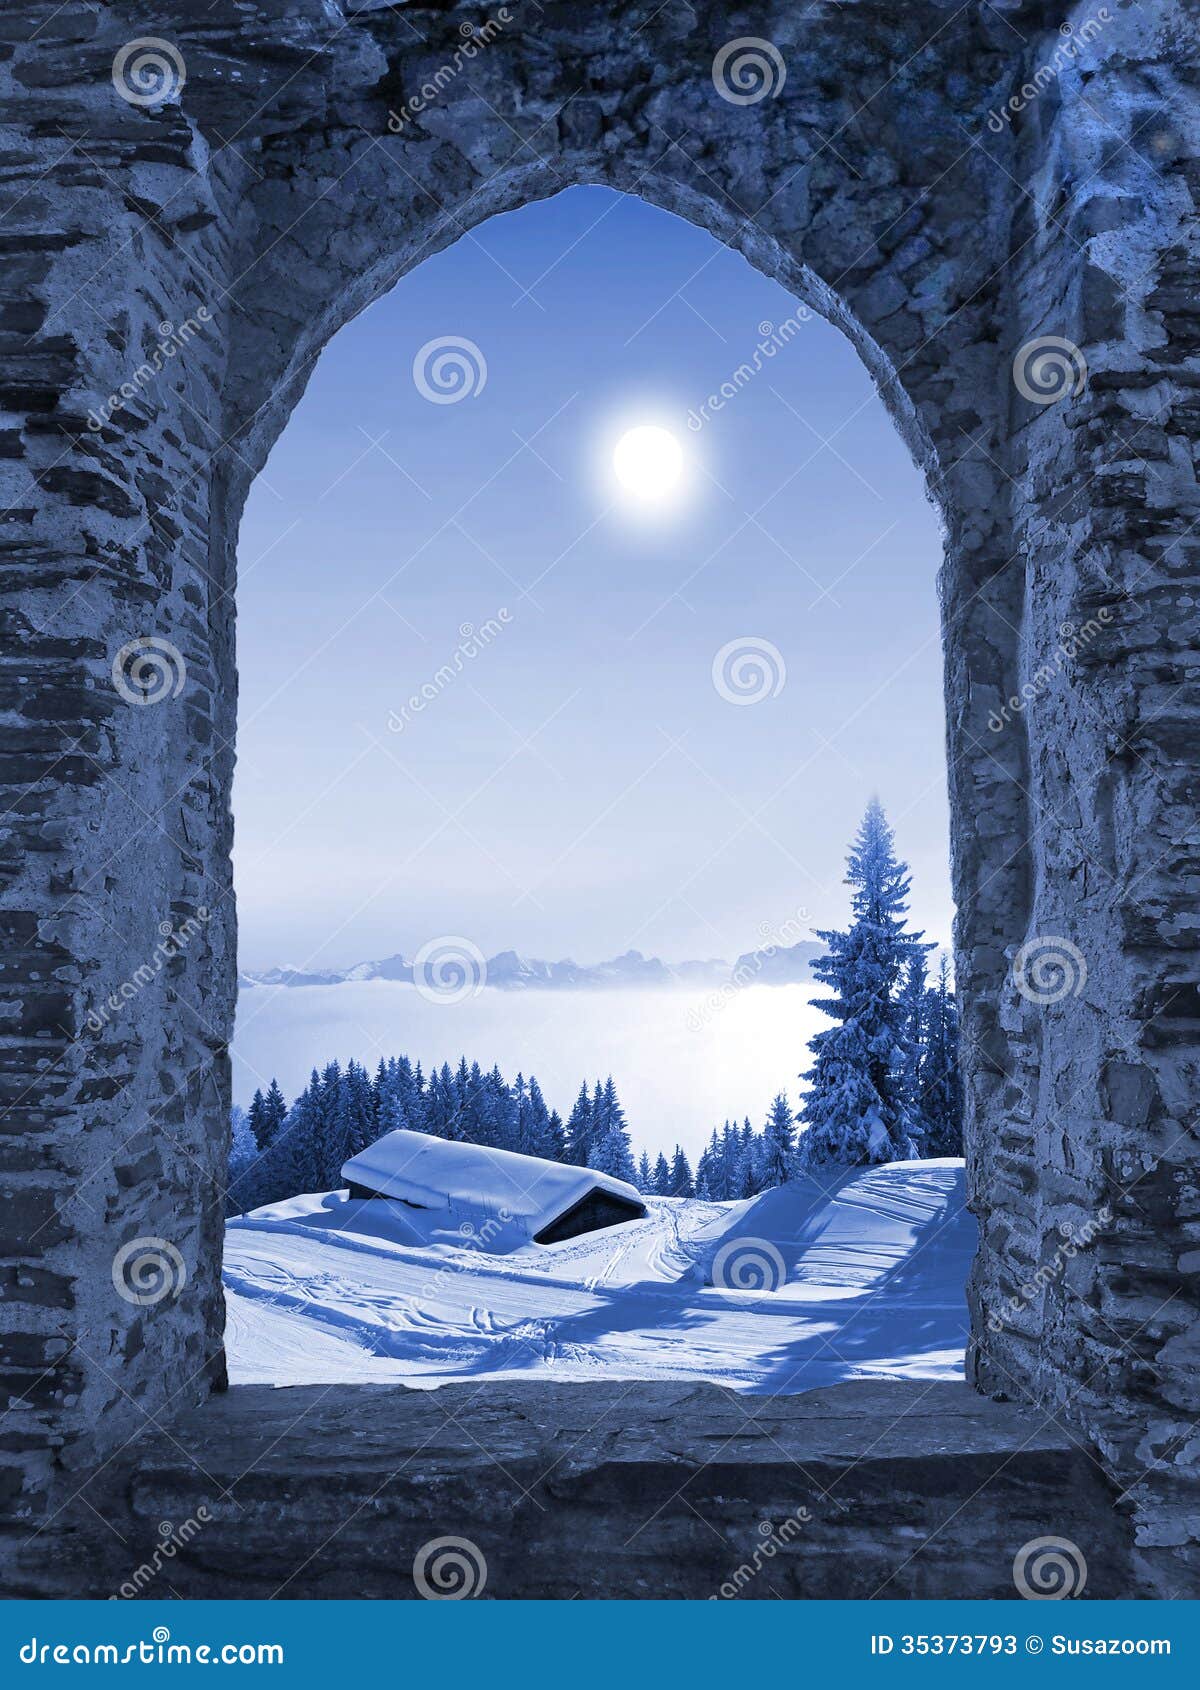 Castle Window with Moonlight Scenery Stock Image - Image of castle